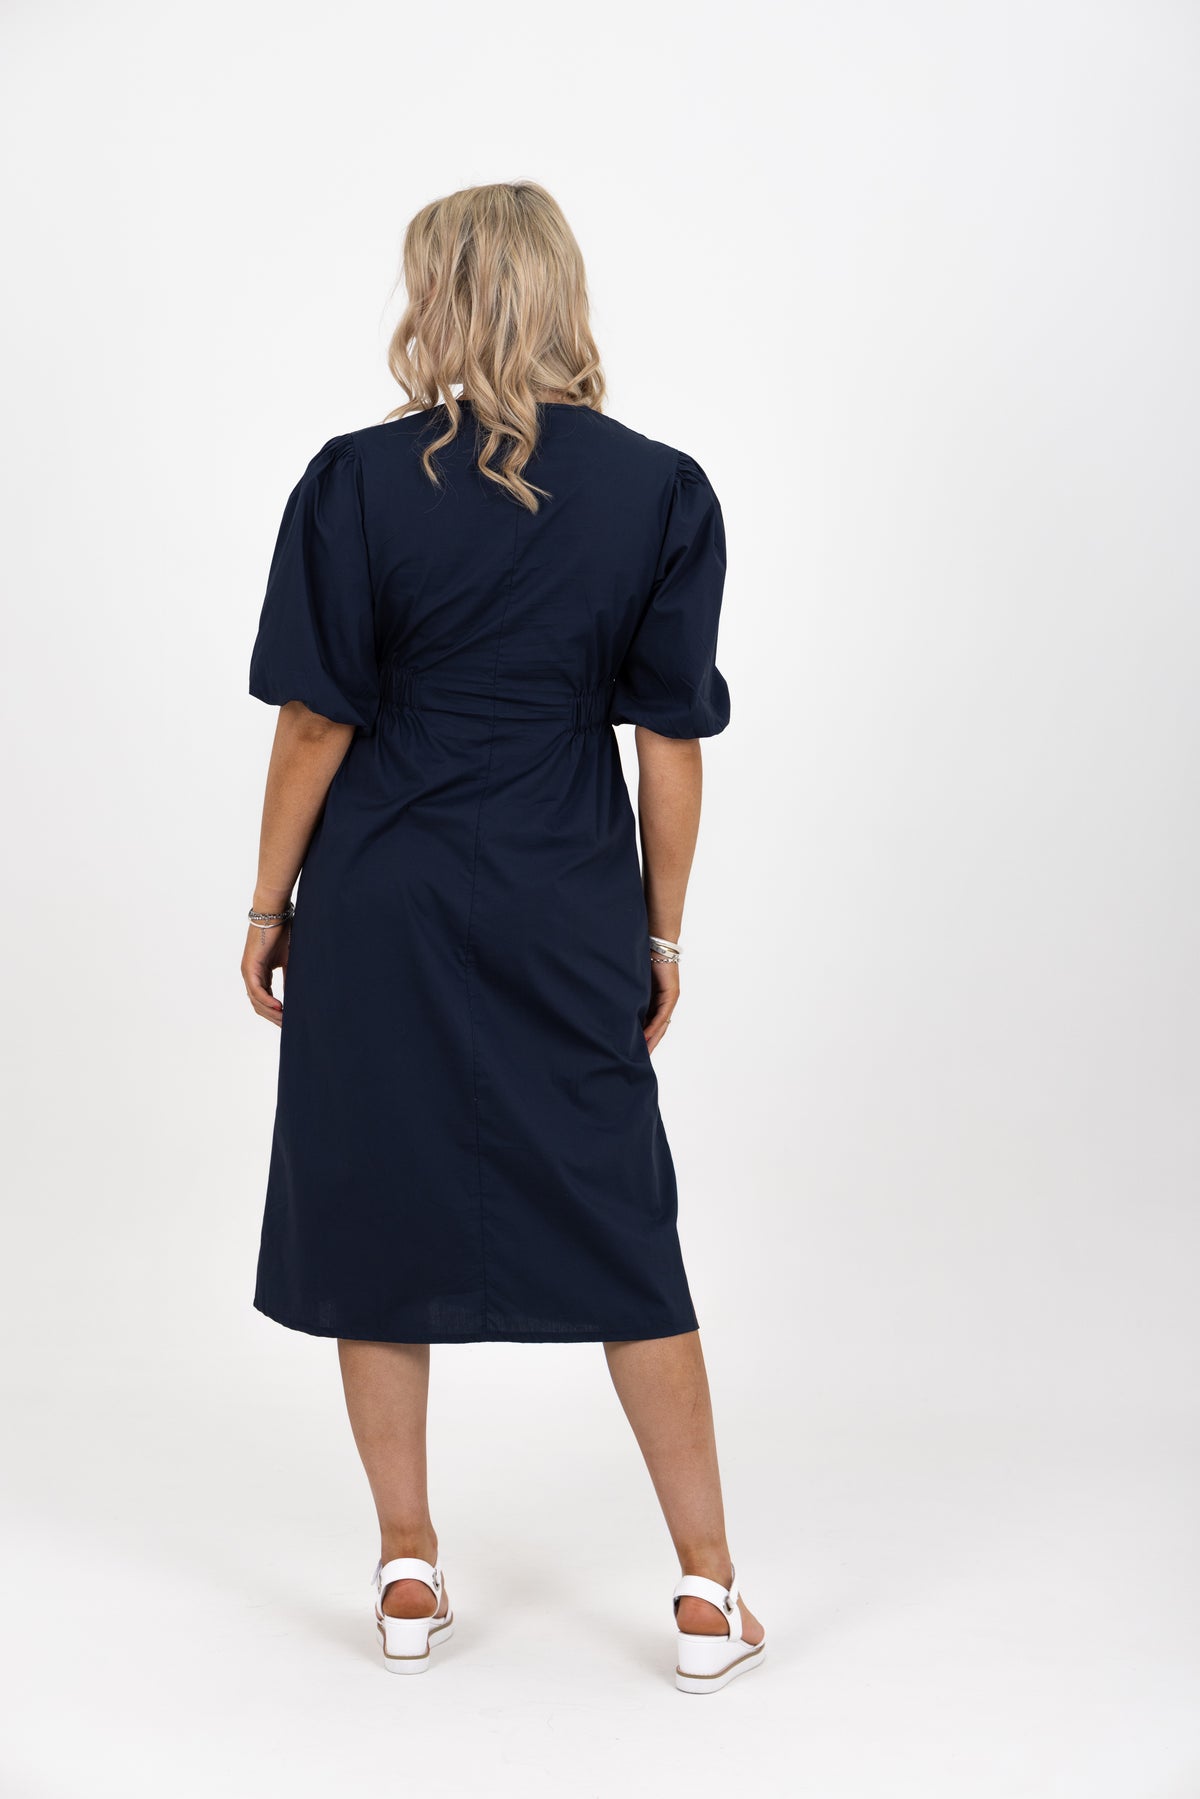 City Of Galway Dress Navy